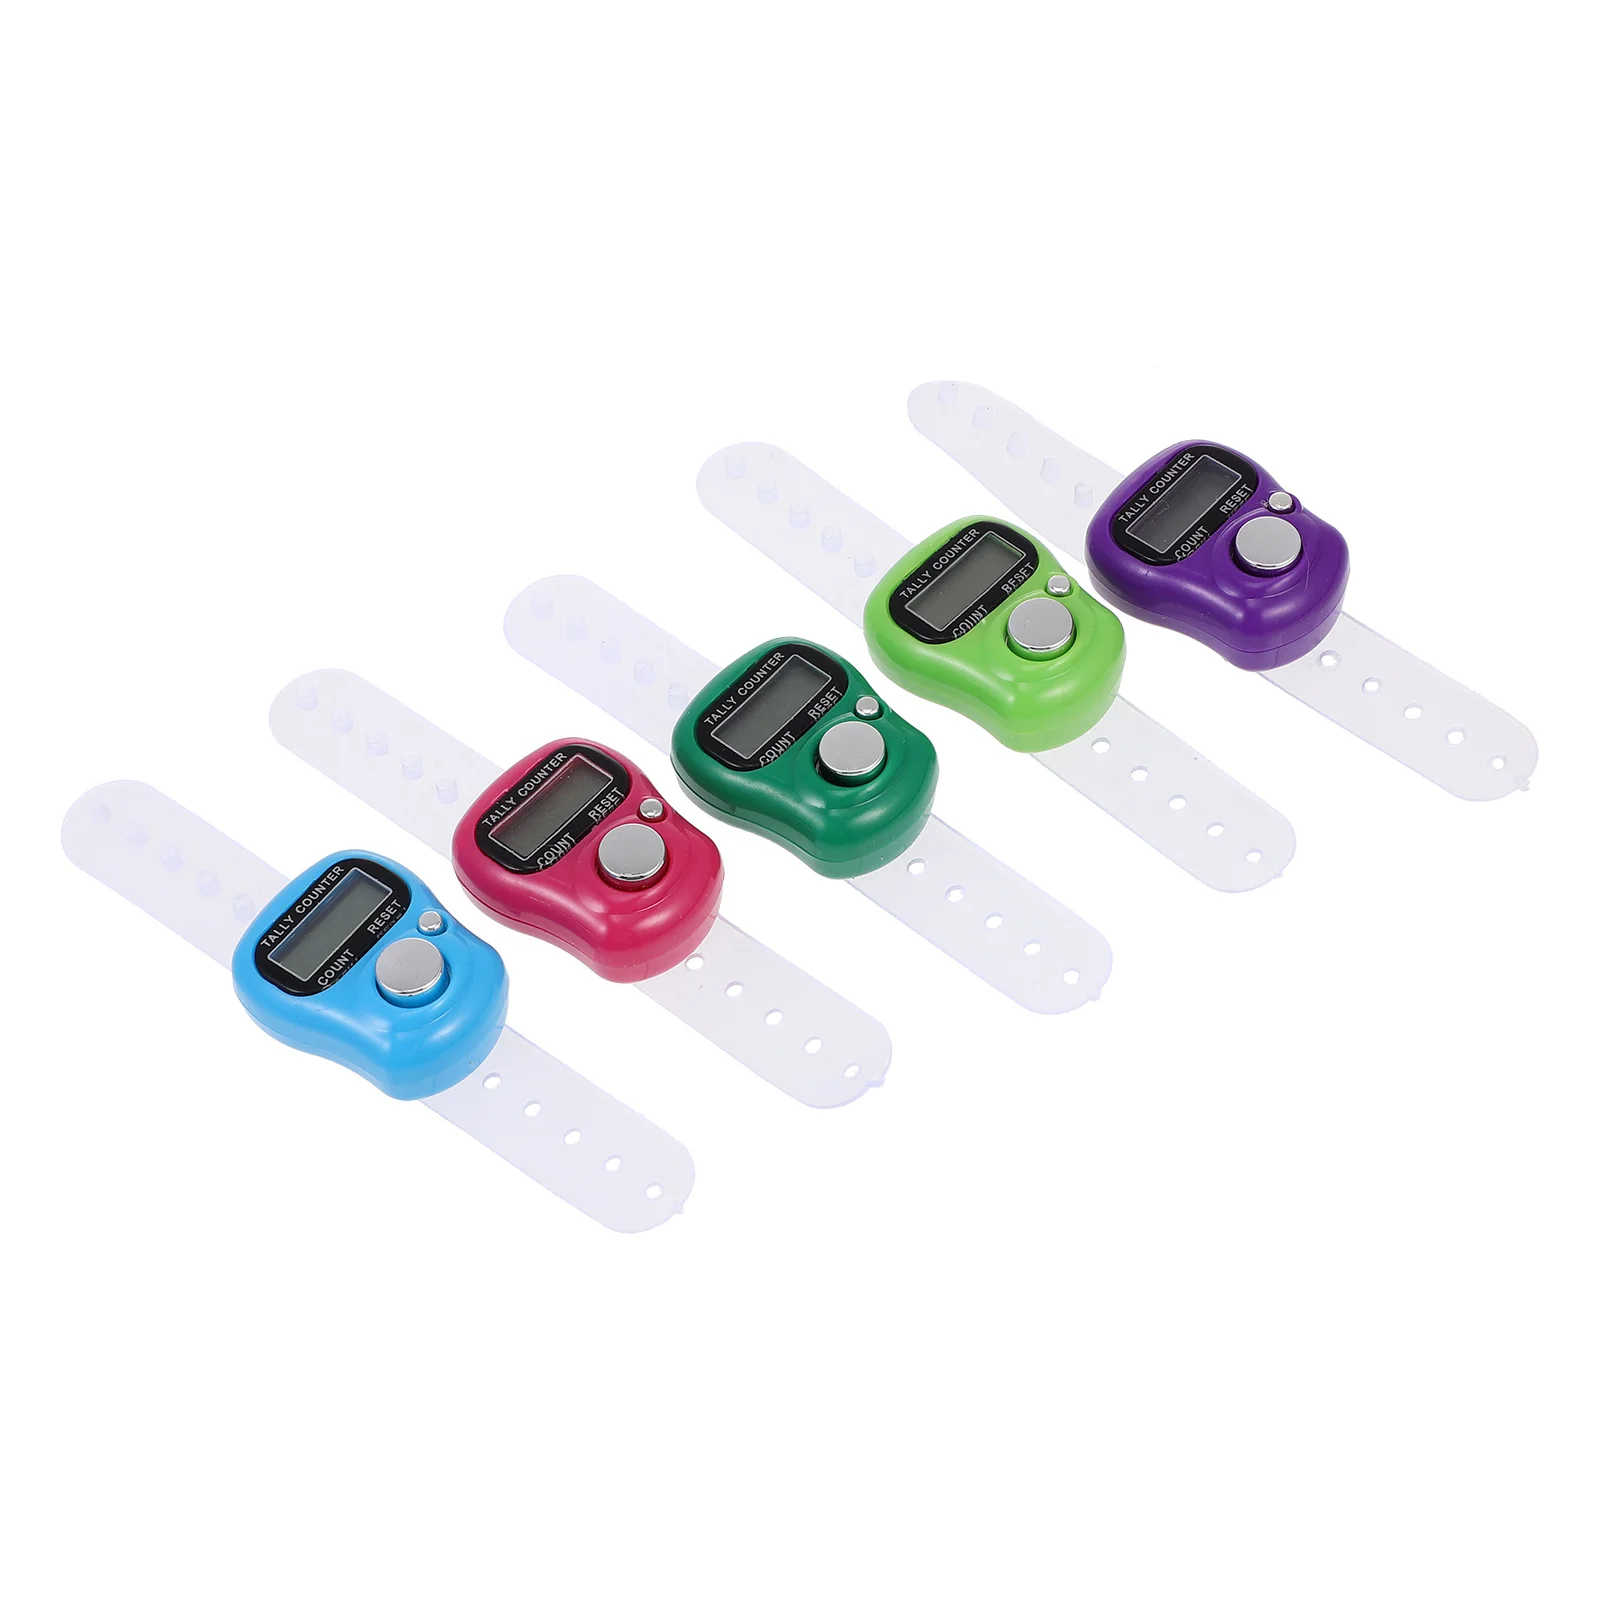 5 Pcs Finger Counter Pray Muslim Tally Counters Clicker Plastic Counting Device Ring